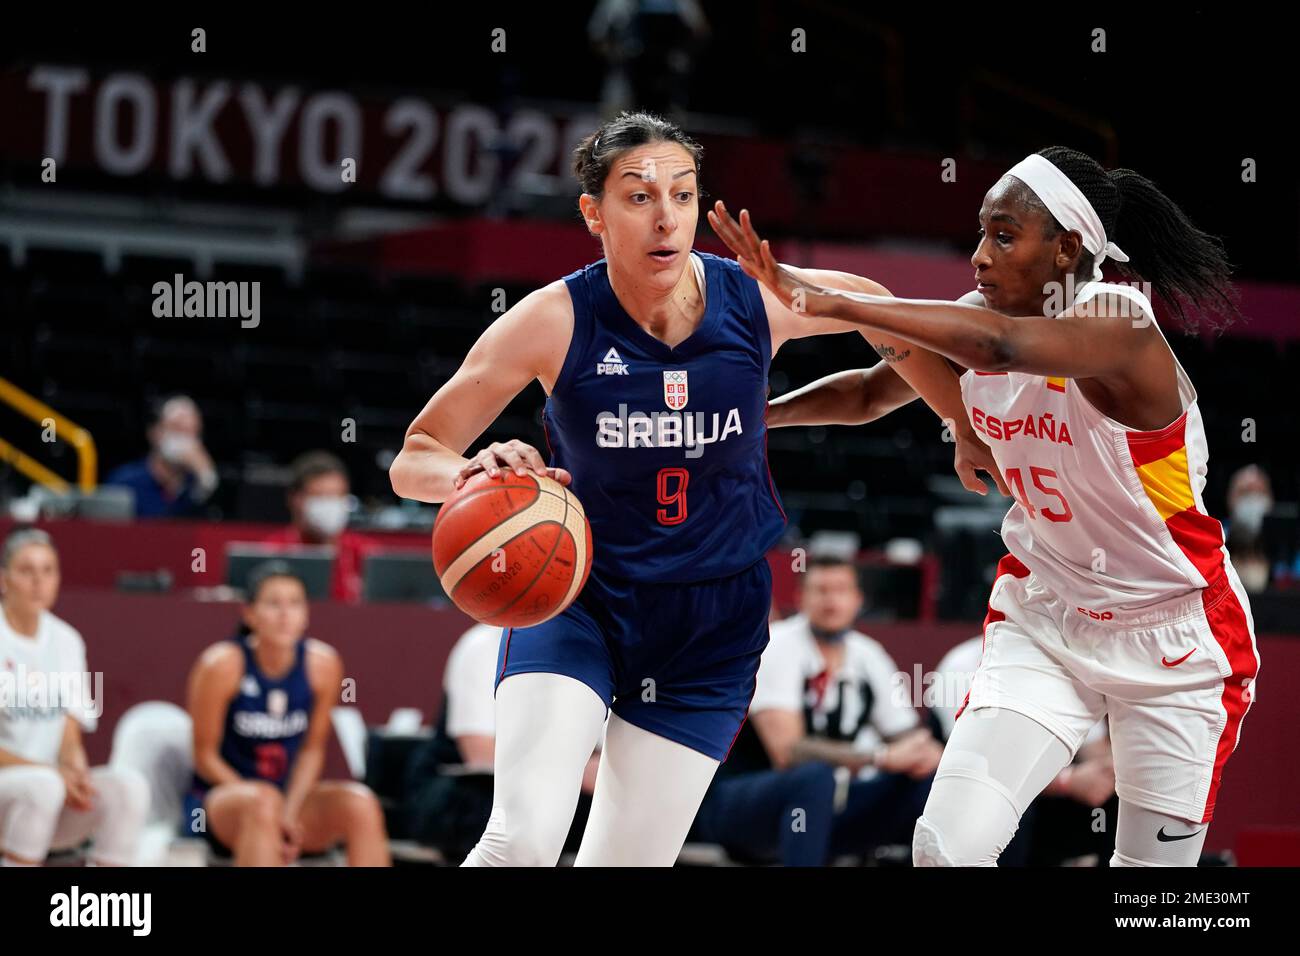 Serbia's Jelena Brooks (9) drives past Spain's Astou Ndour (45) during a  women's basketball preliminary round game at the 2020 Summer Olympics,  Thursday, July 29, 2021, in Saitama, Japan. (AP Photo/Charlie Neibergall  Stock Photo - Alamy